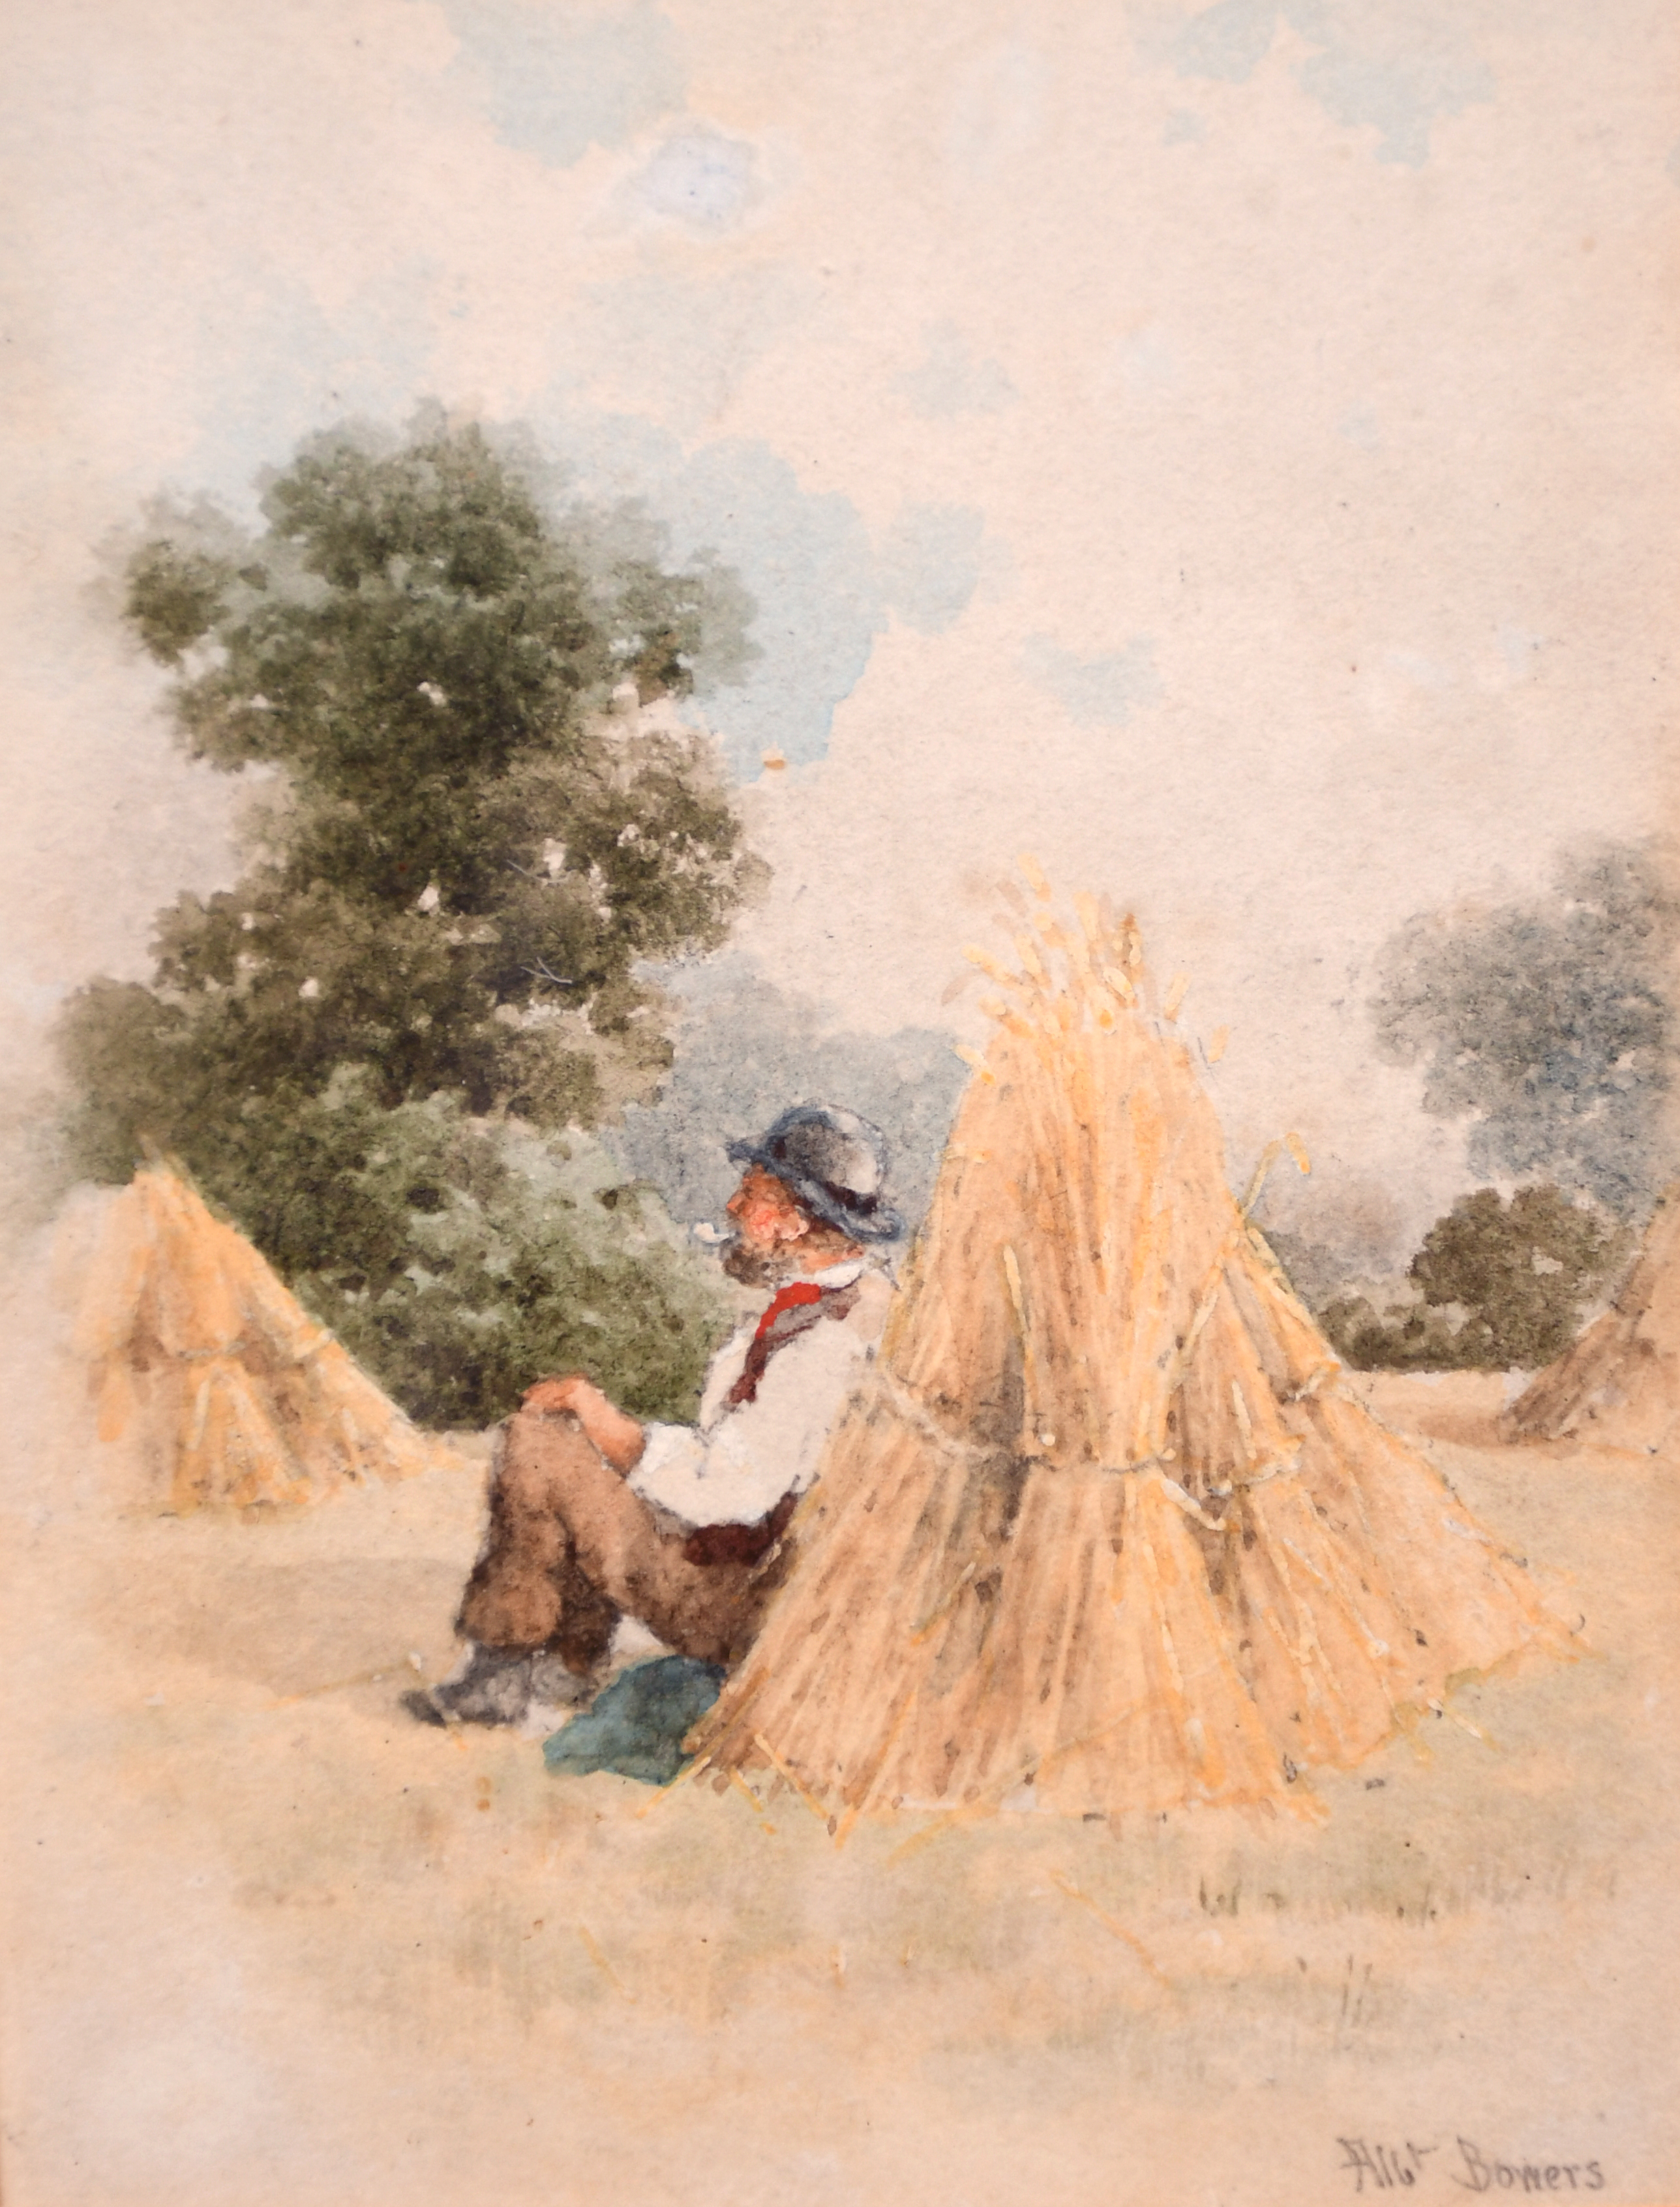 Albert Edward Bowers (exh.1880-1893) British. “The Midday Rest”, Watercolour, Signed, and